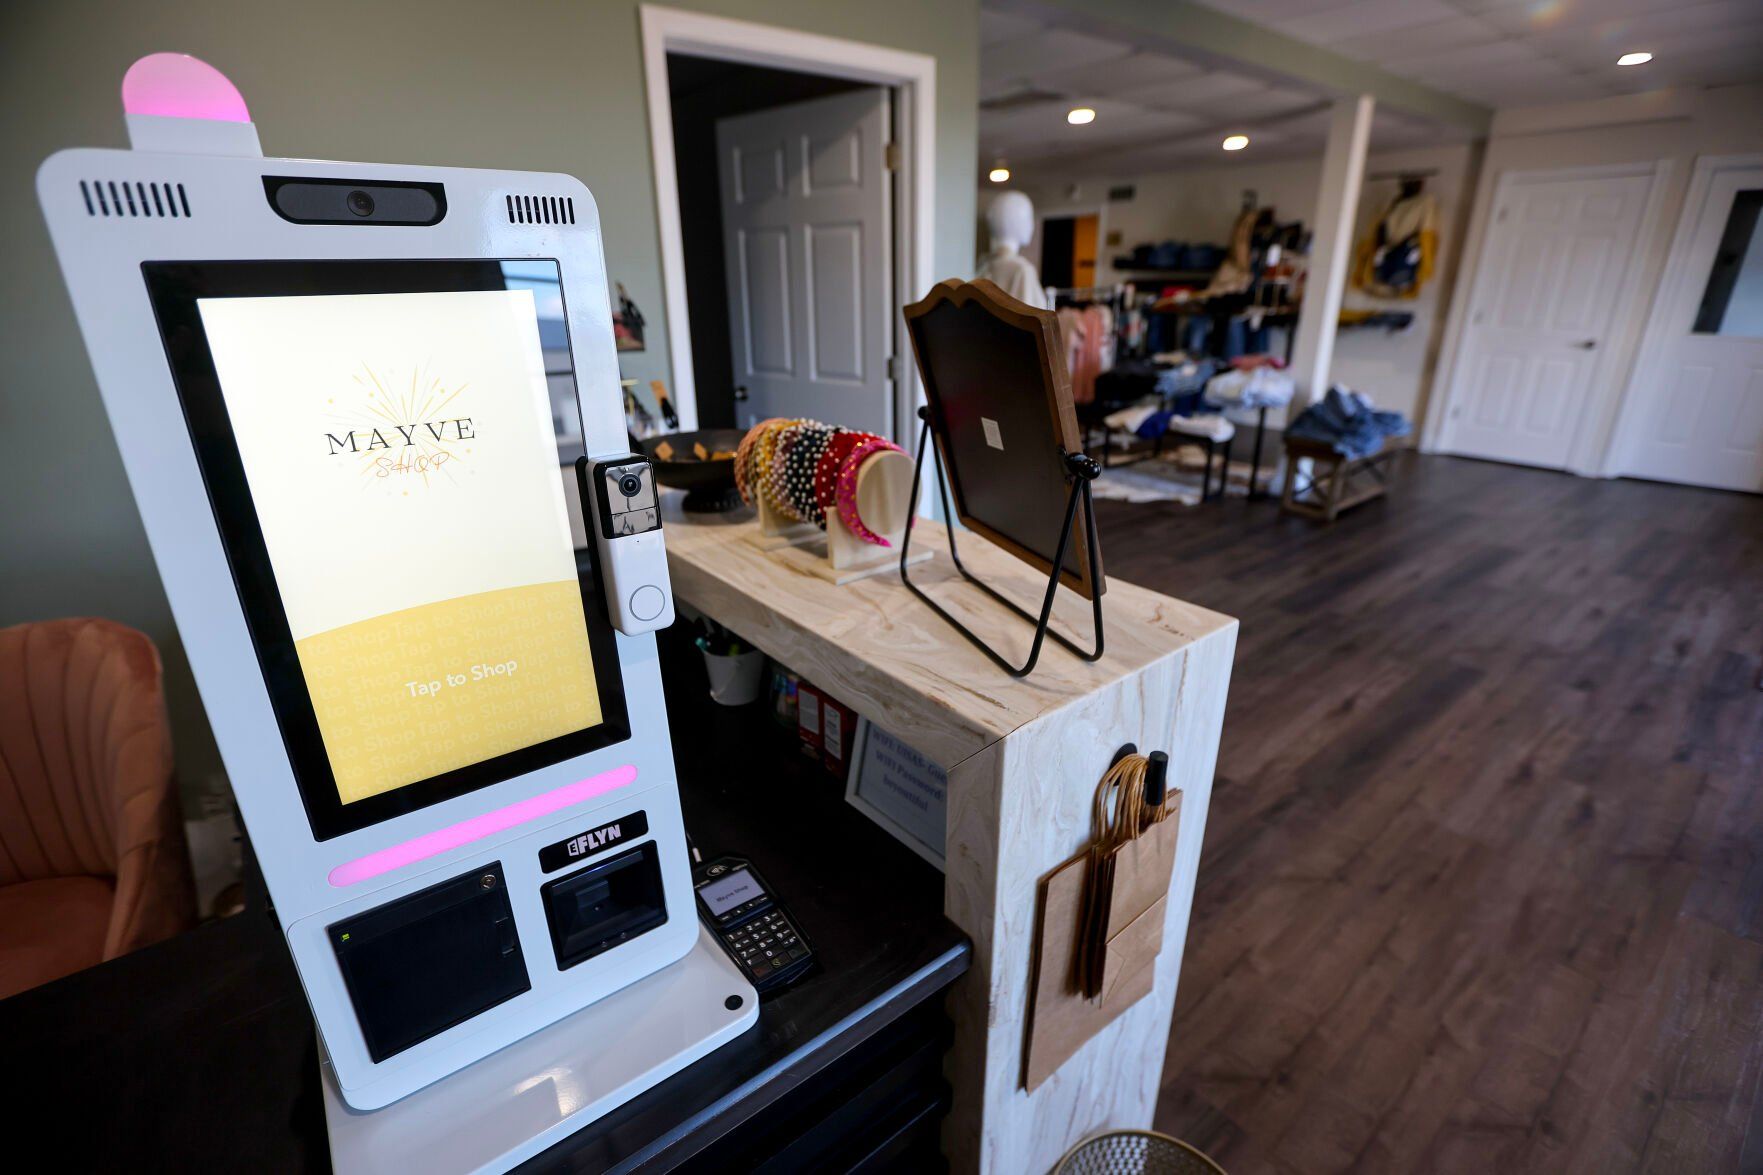 One of the added features at Mayve is this self-checkout kiosk.    PHOTO CREDIT: Dave Kettering